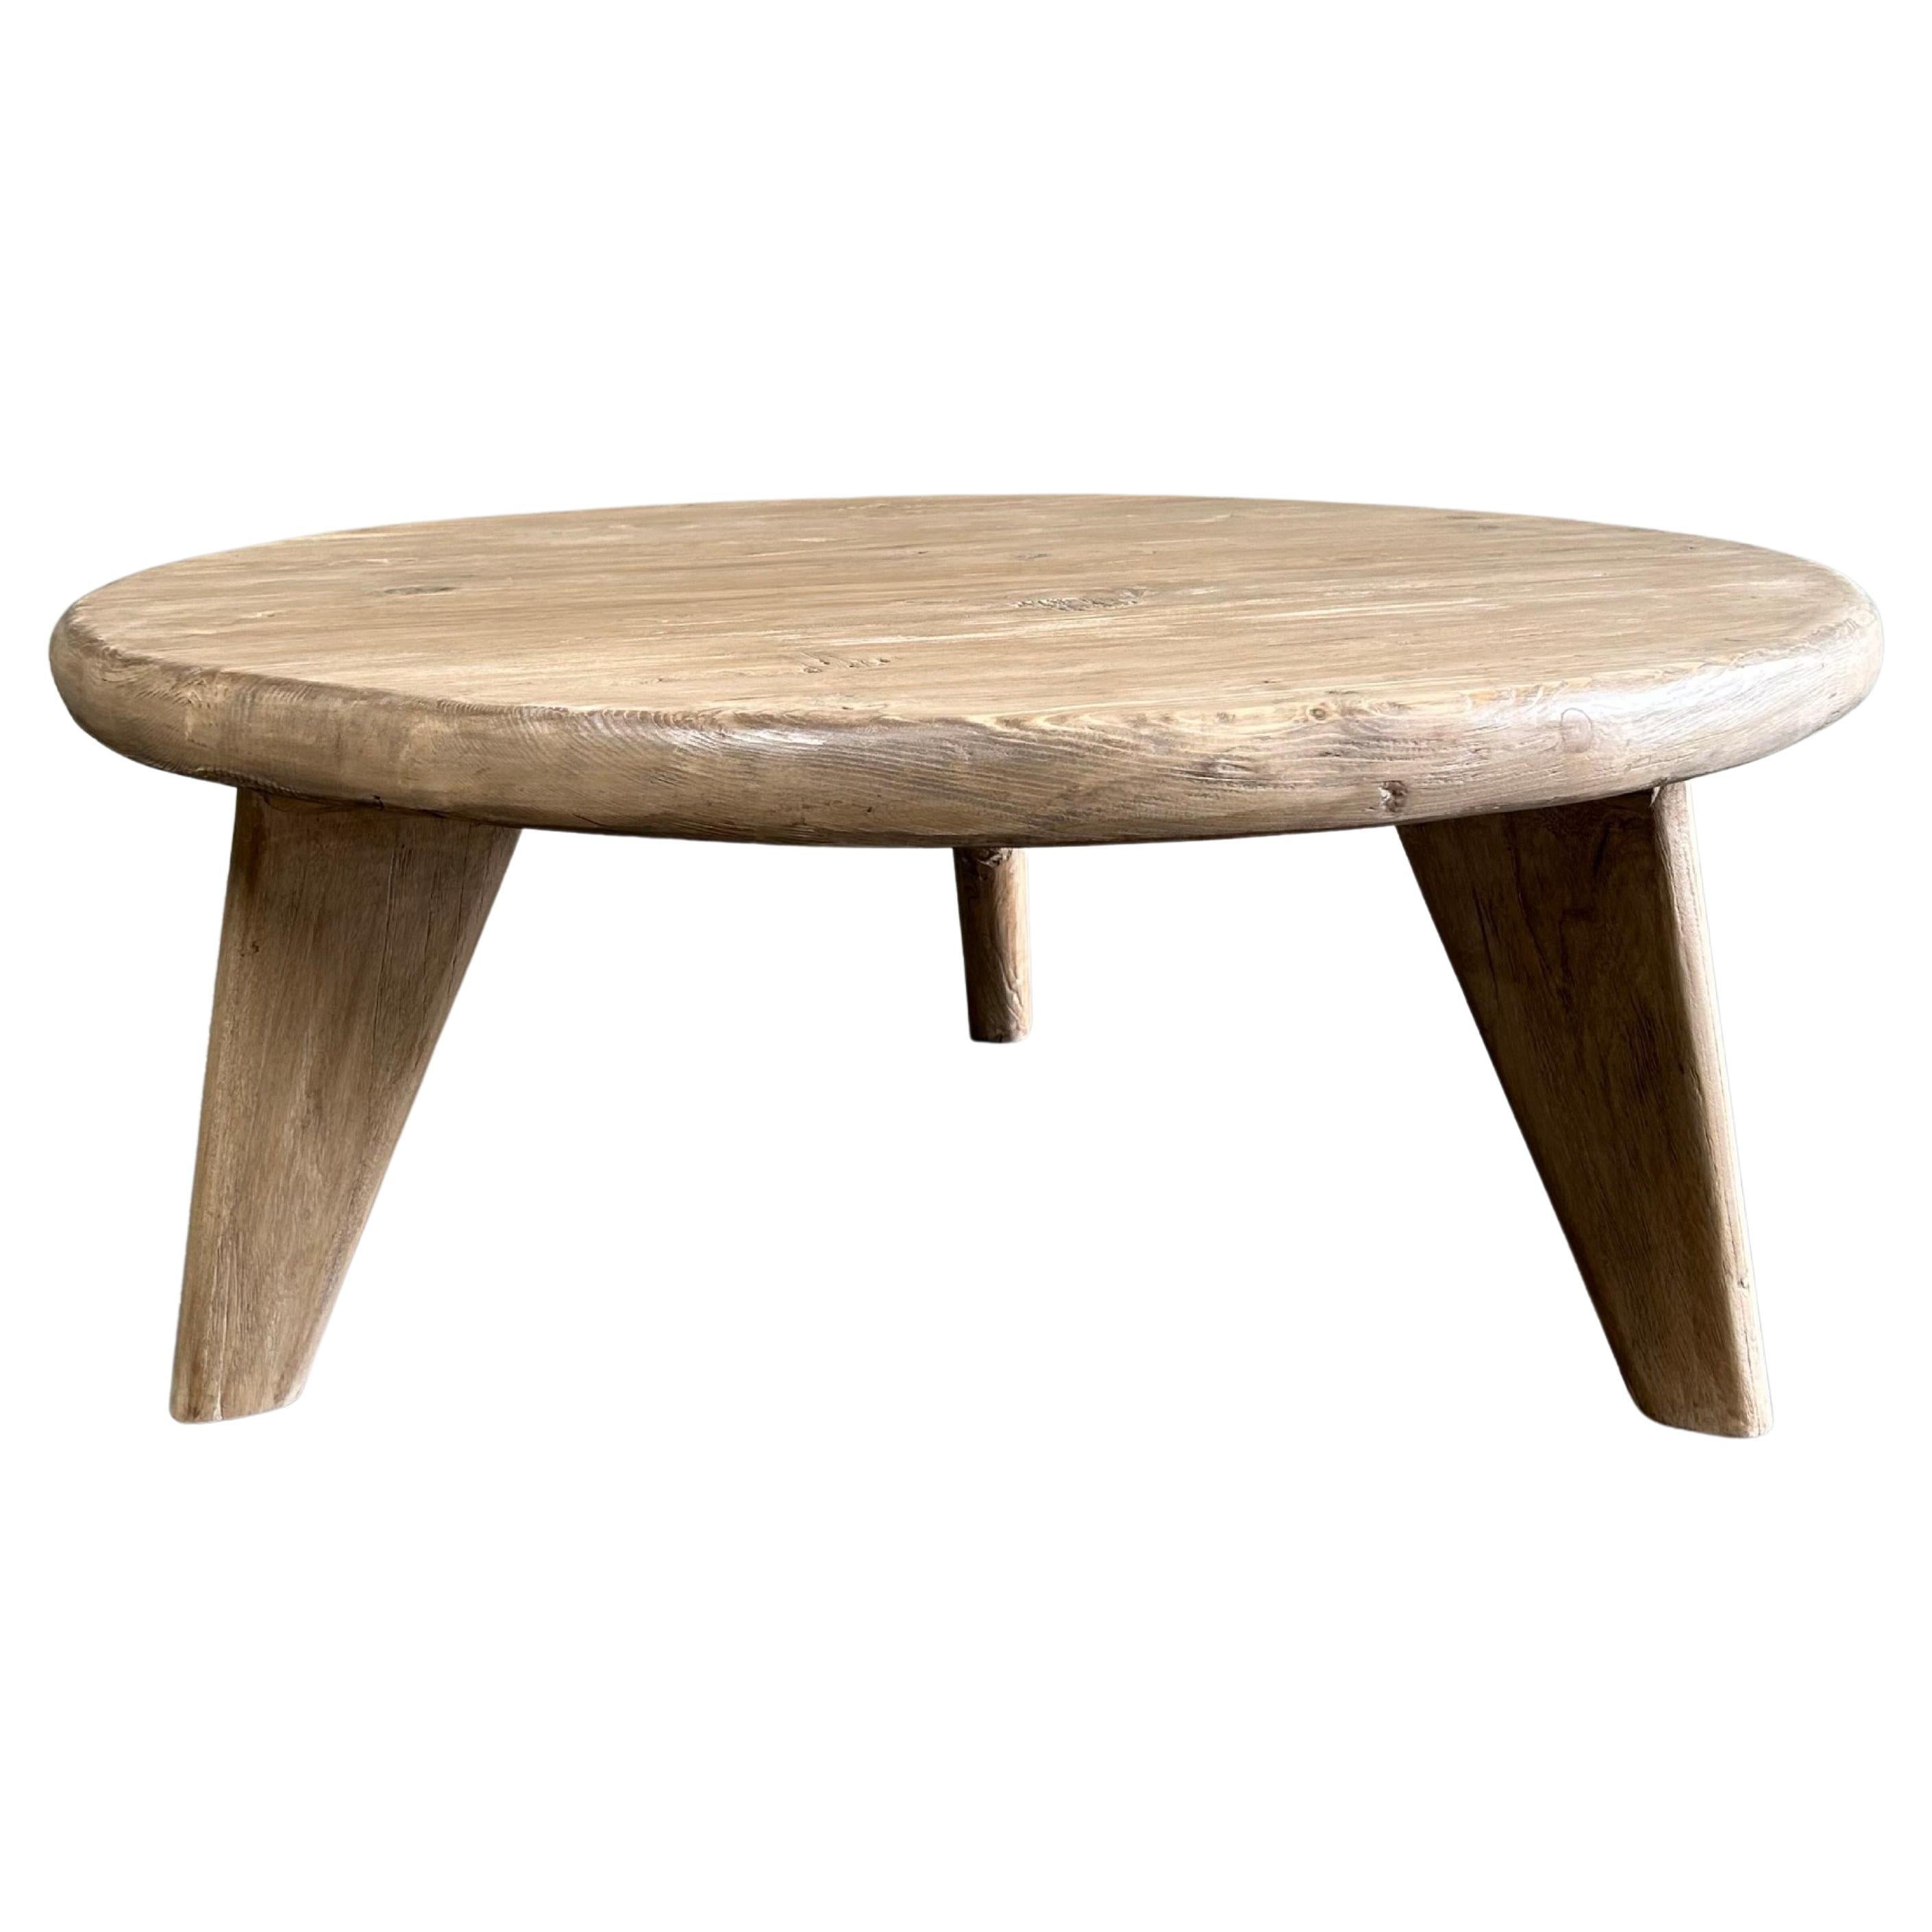 Custom Reclaimed Elm Wood Round Coffee Table with 3 Legs For Sale